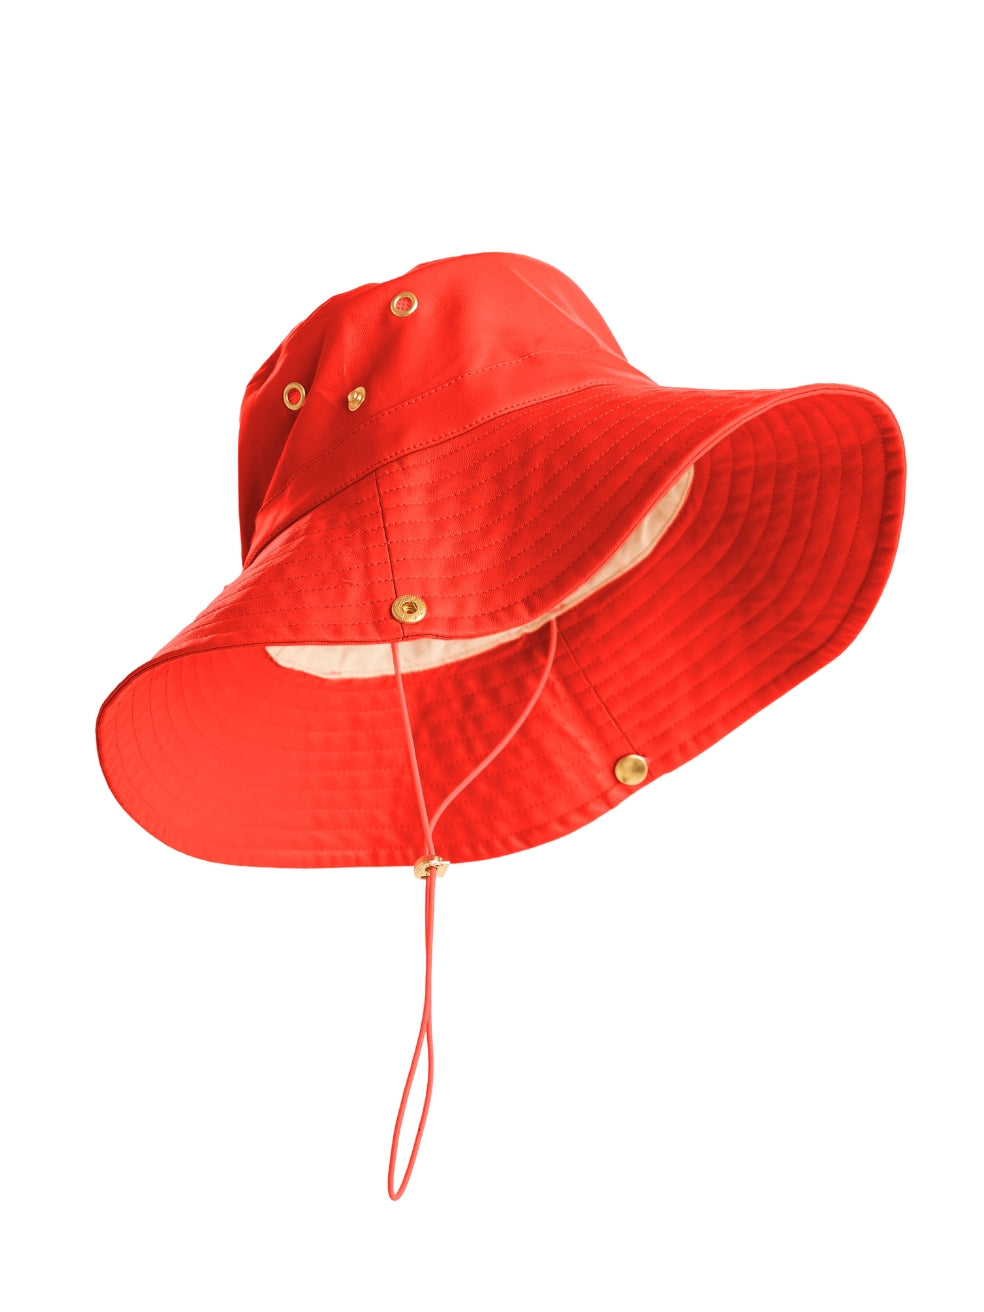 Fishermans bucket hat luxury animal-free leather bright tart red made in canada